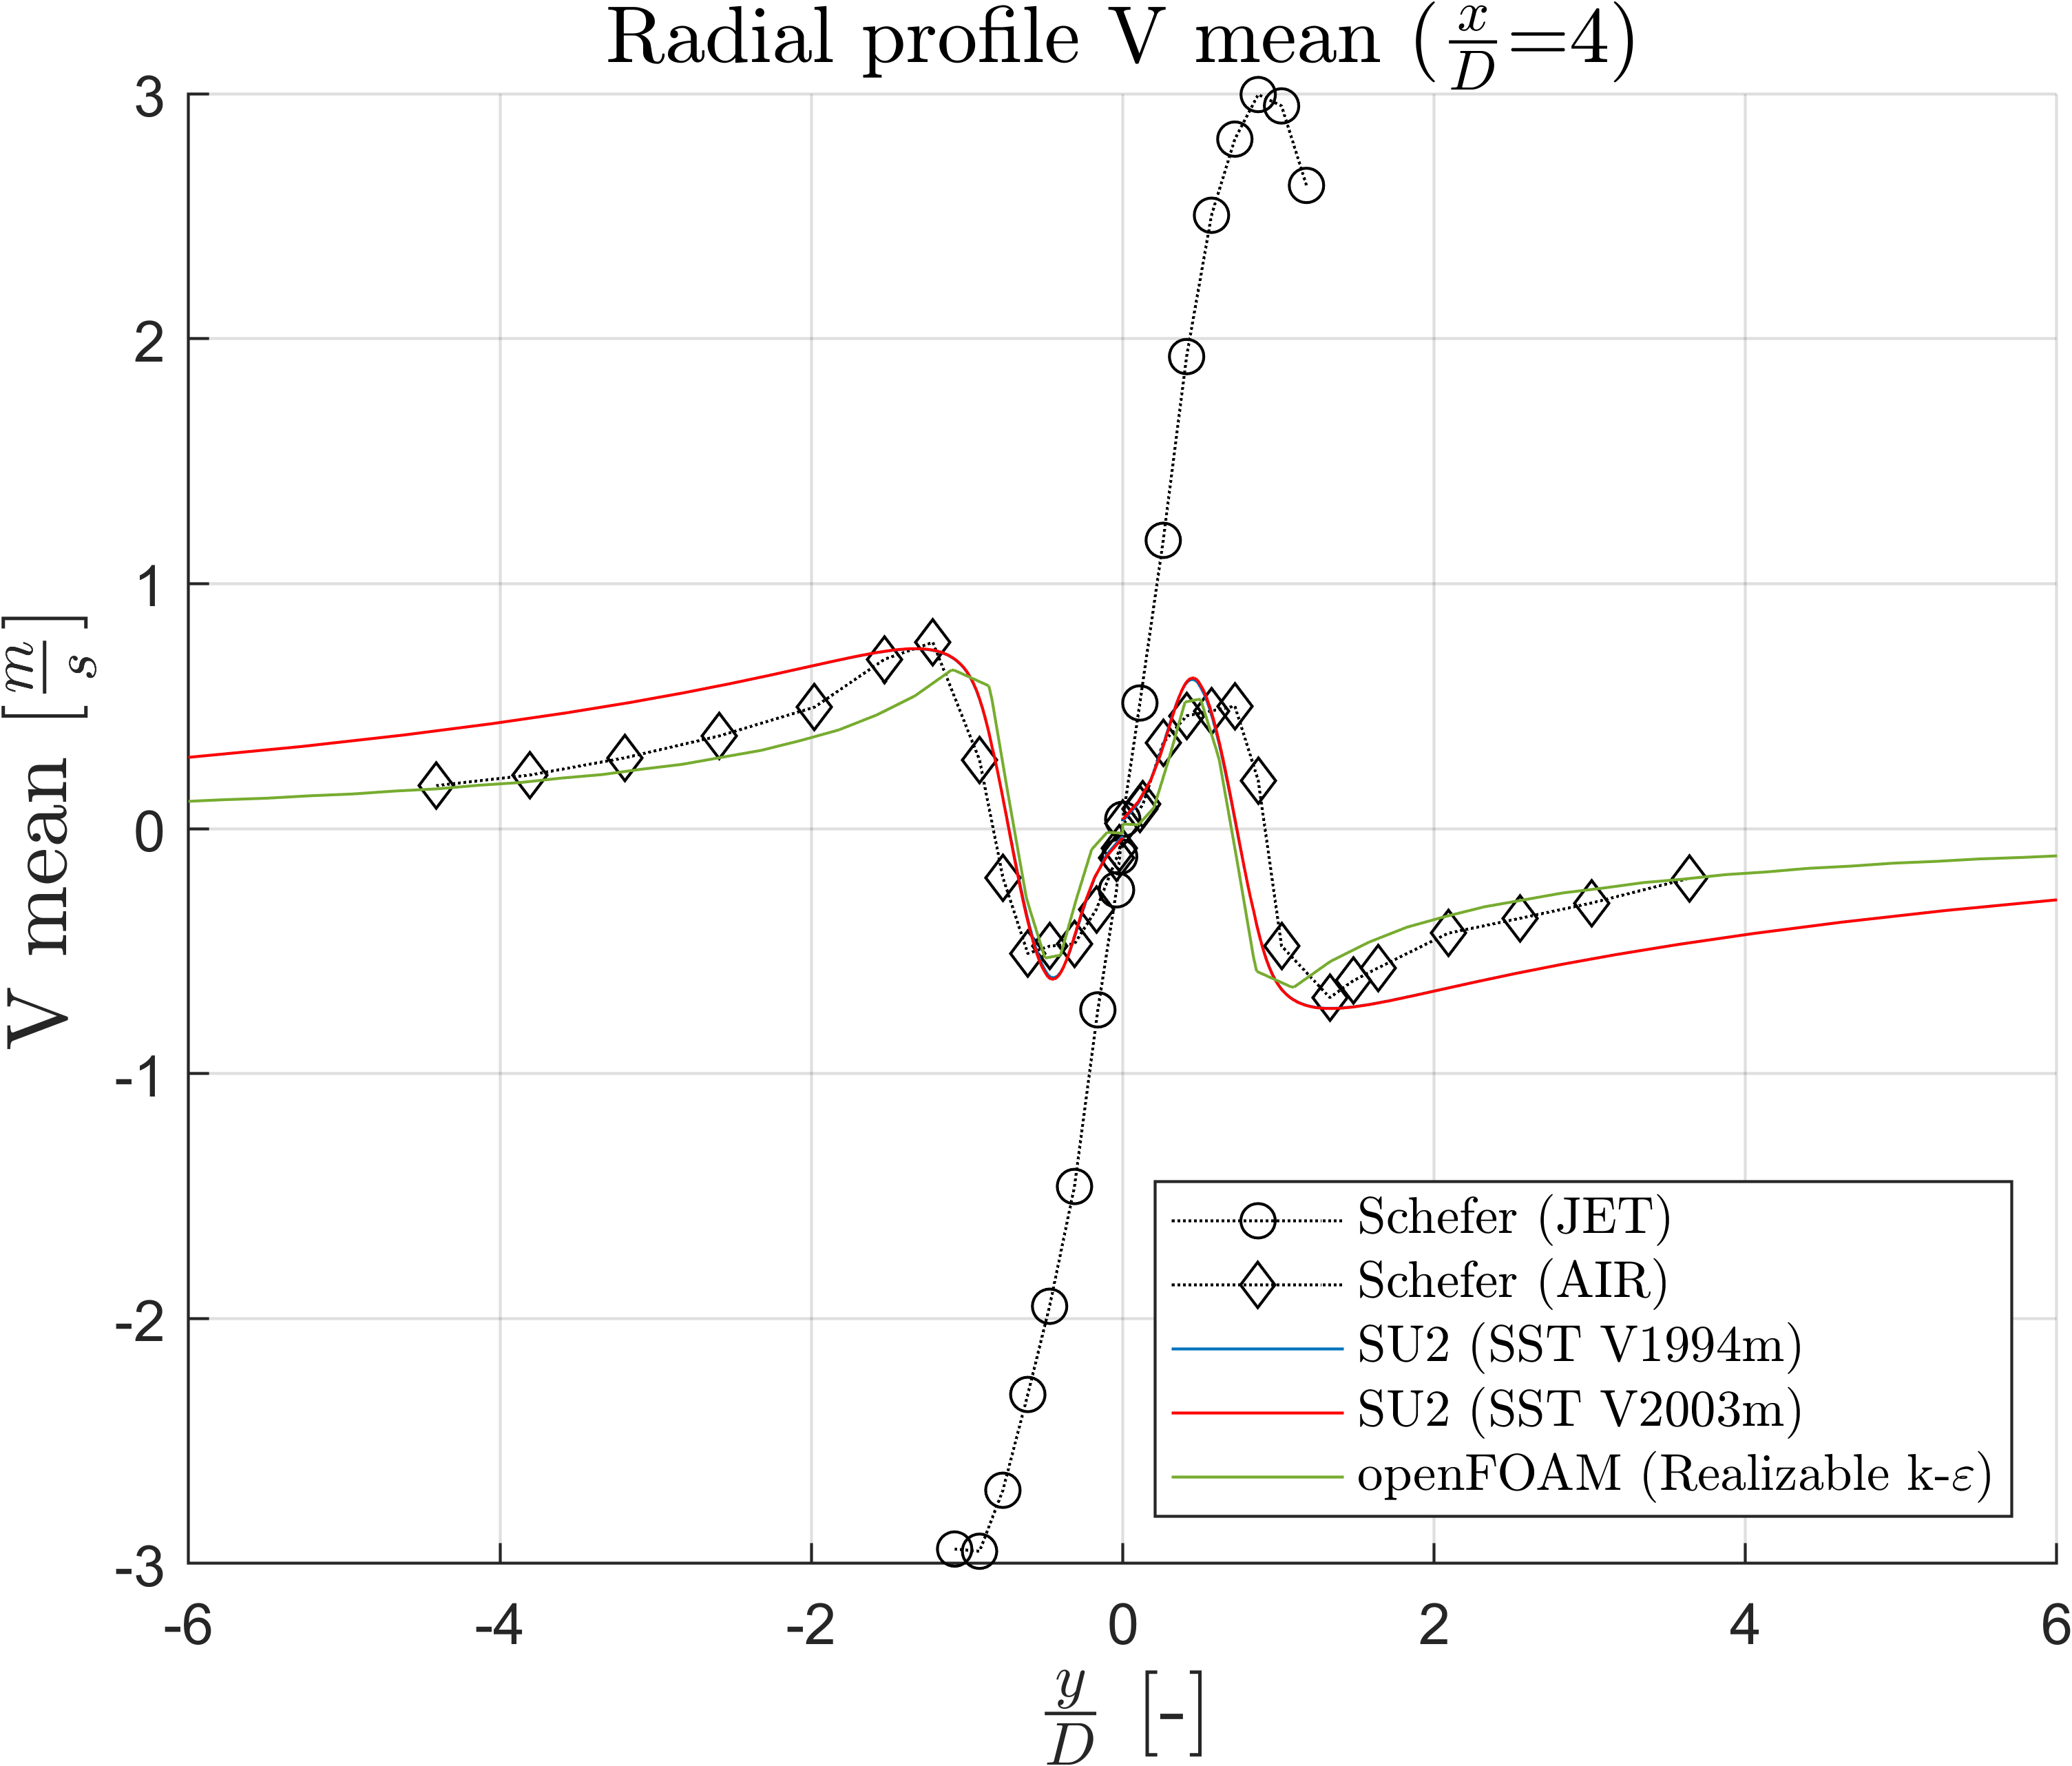 Mean Radial Velocity at x/D=4